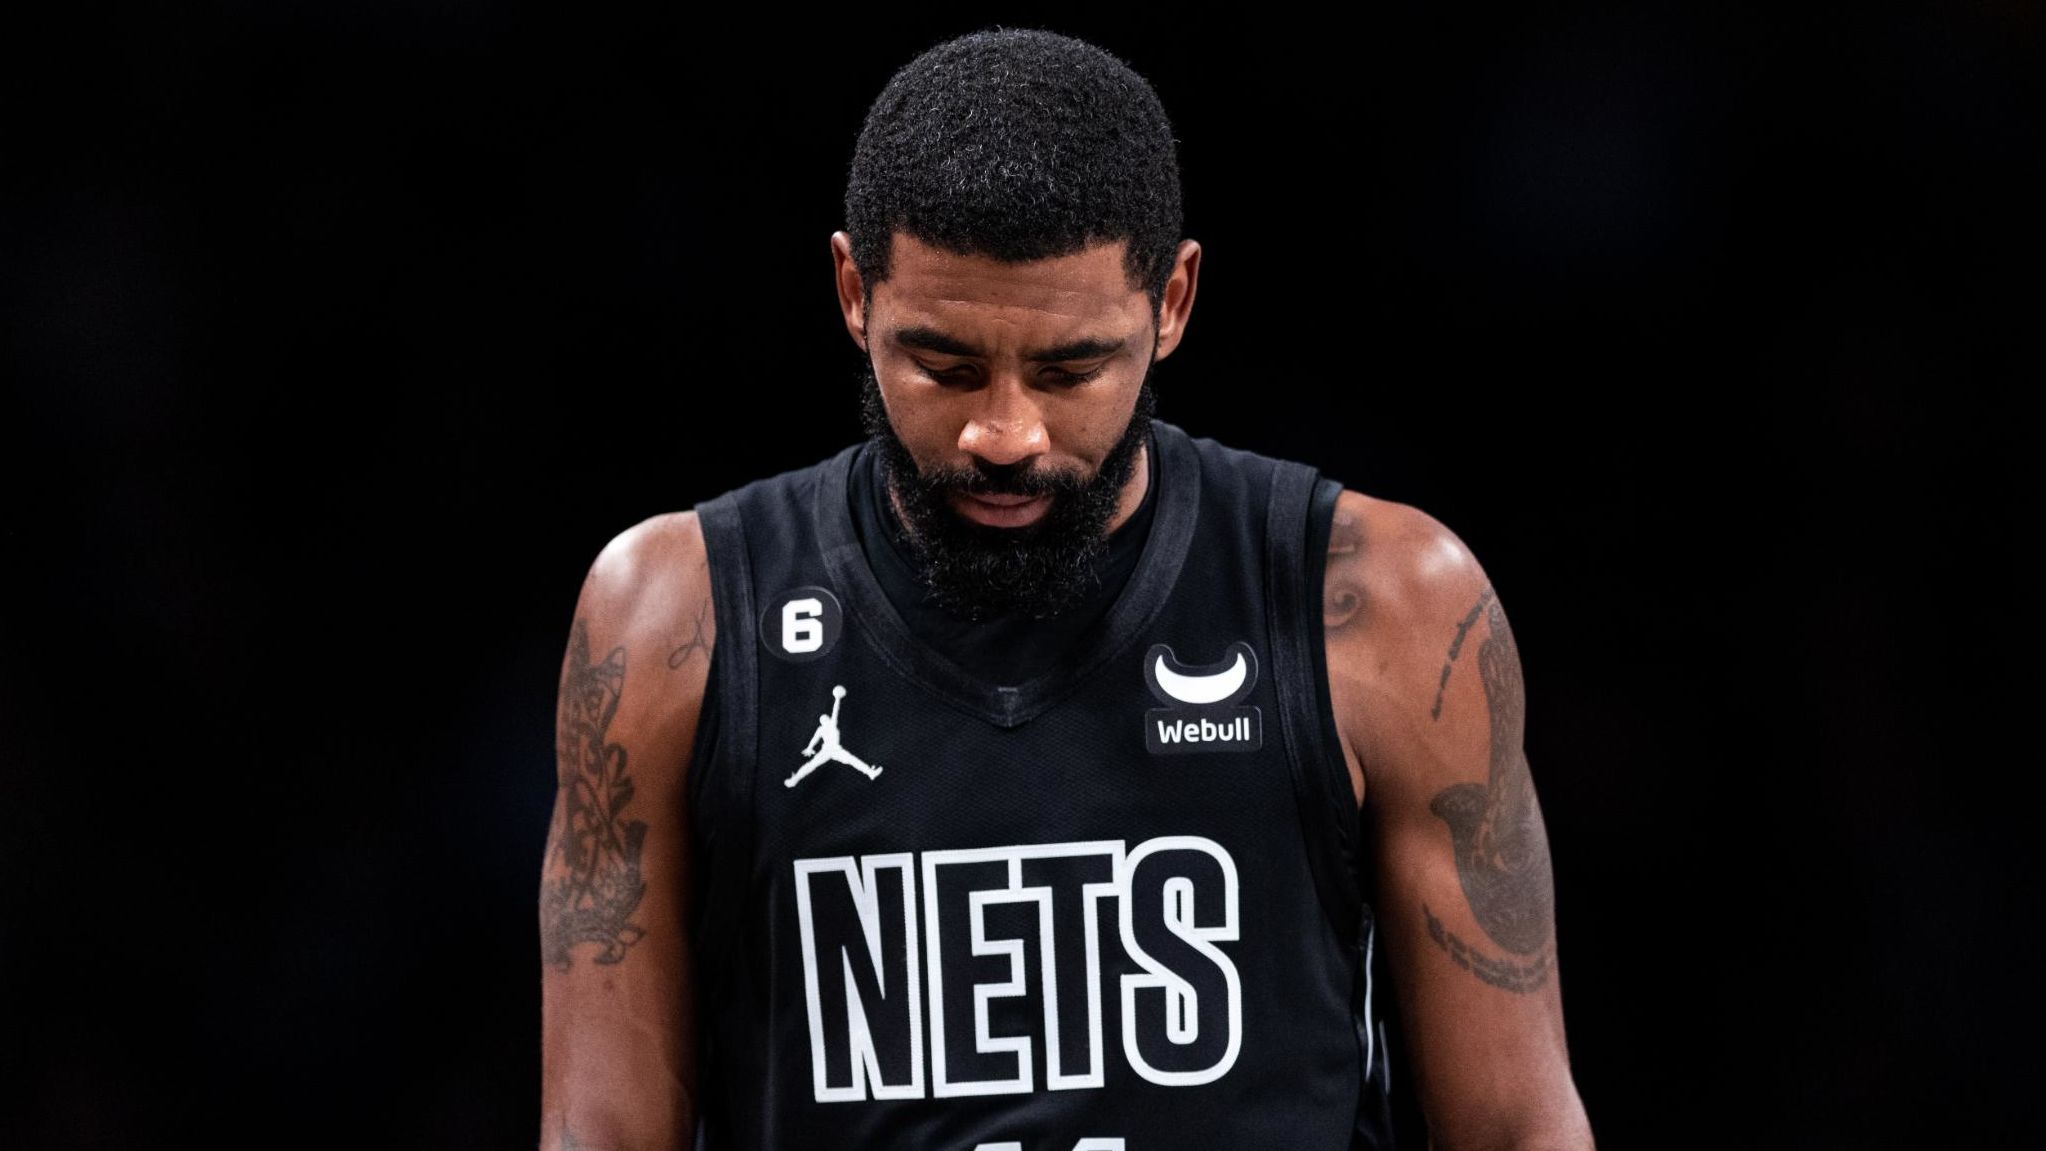 Irving walks to the bench during the second quarter of the game against the Indiana Pacers at Barclays Center on October 31, 2022.